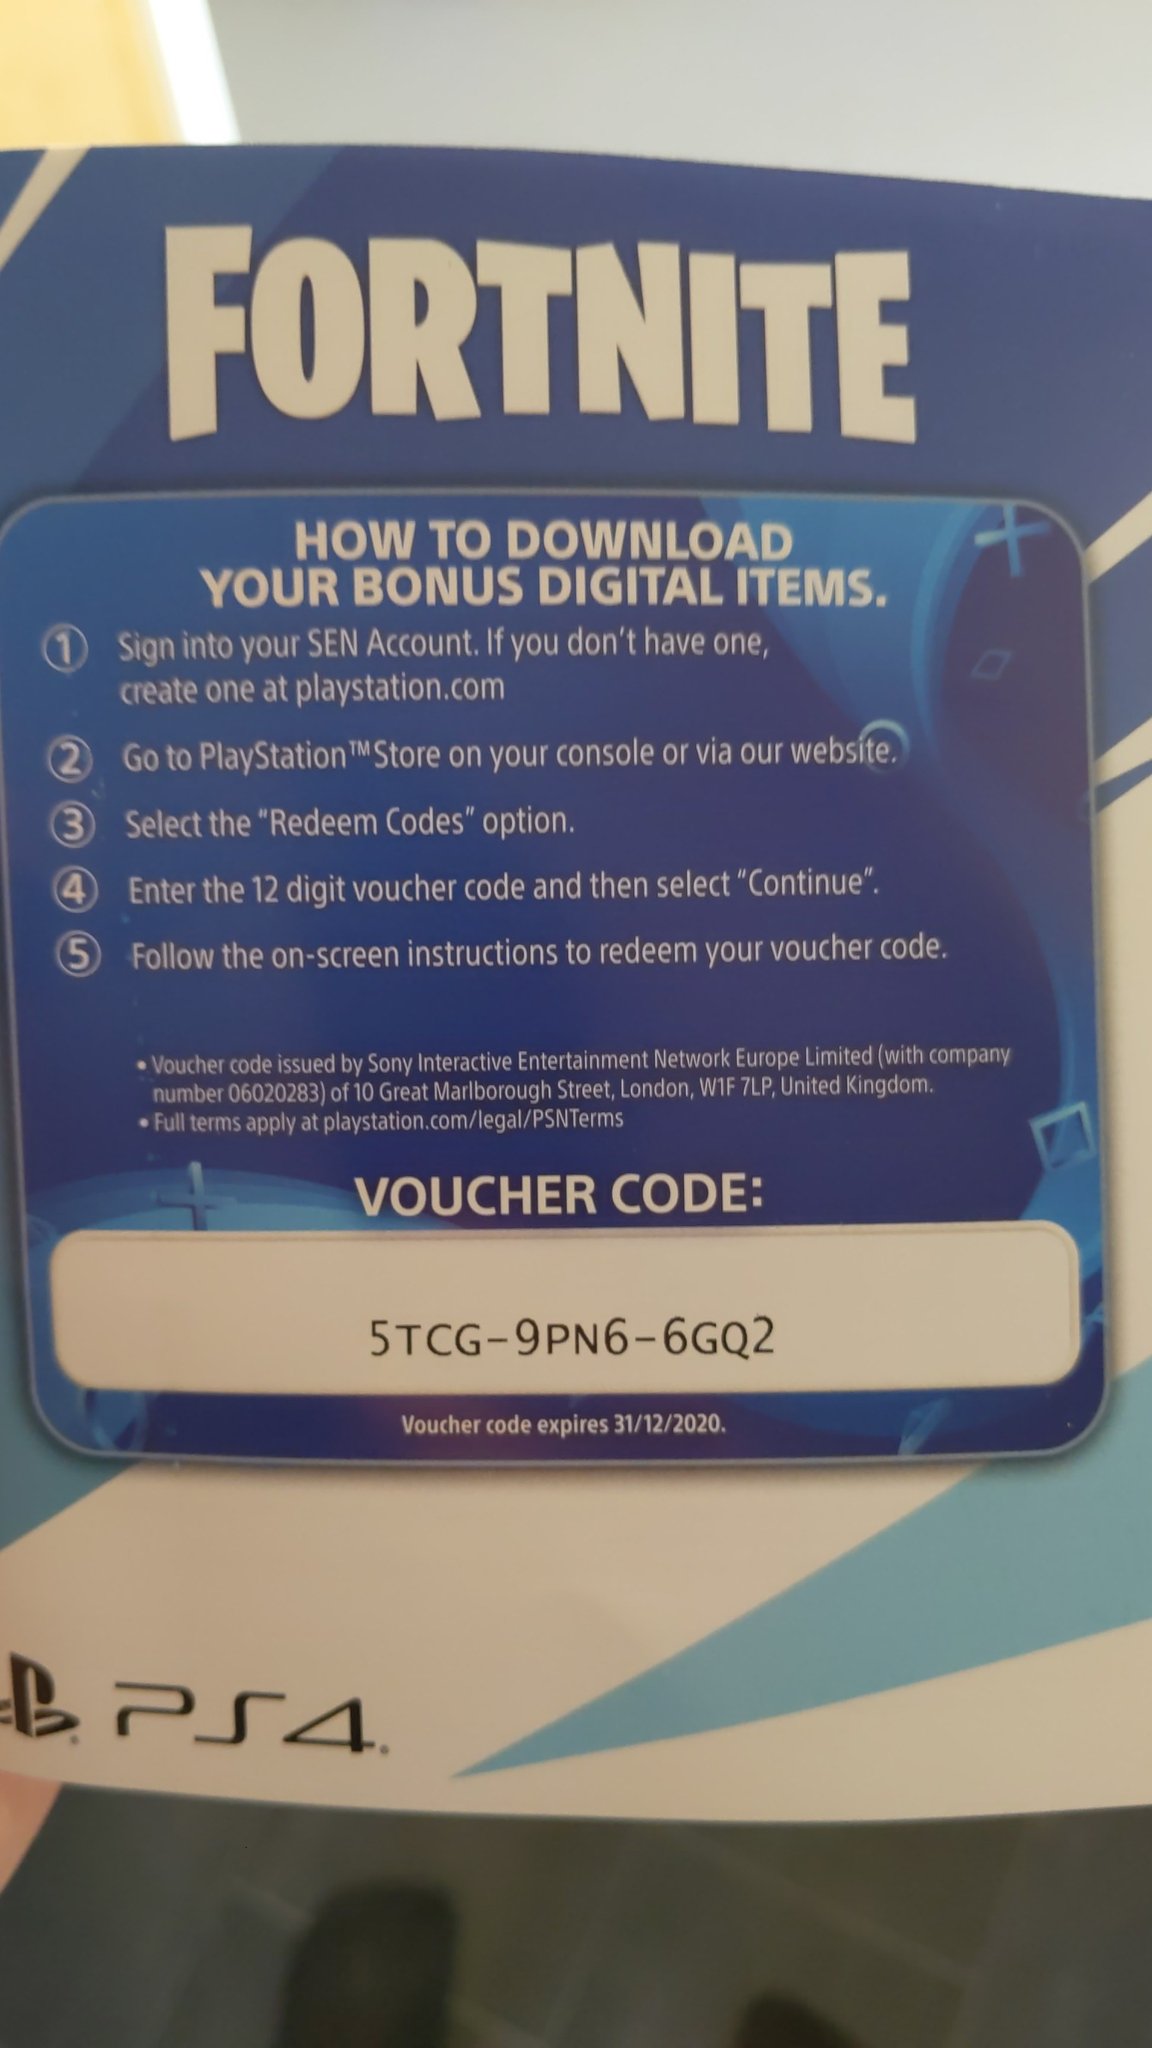 forbrydelse Rise samvittighed Jamie Norman on Twitter: "Bought a new ps4 controller, and it came with a  random Fortnite code. I don't play, so first come first to have:  https://t.co/KJd3cguajk" / Twitter